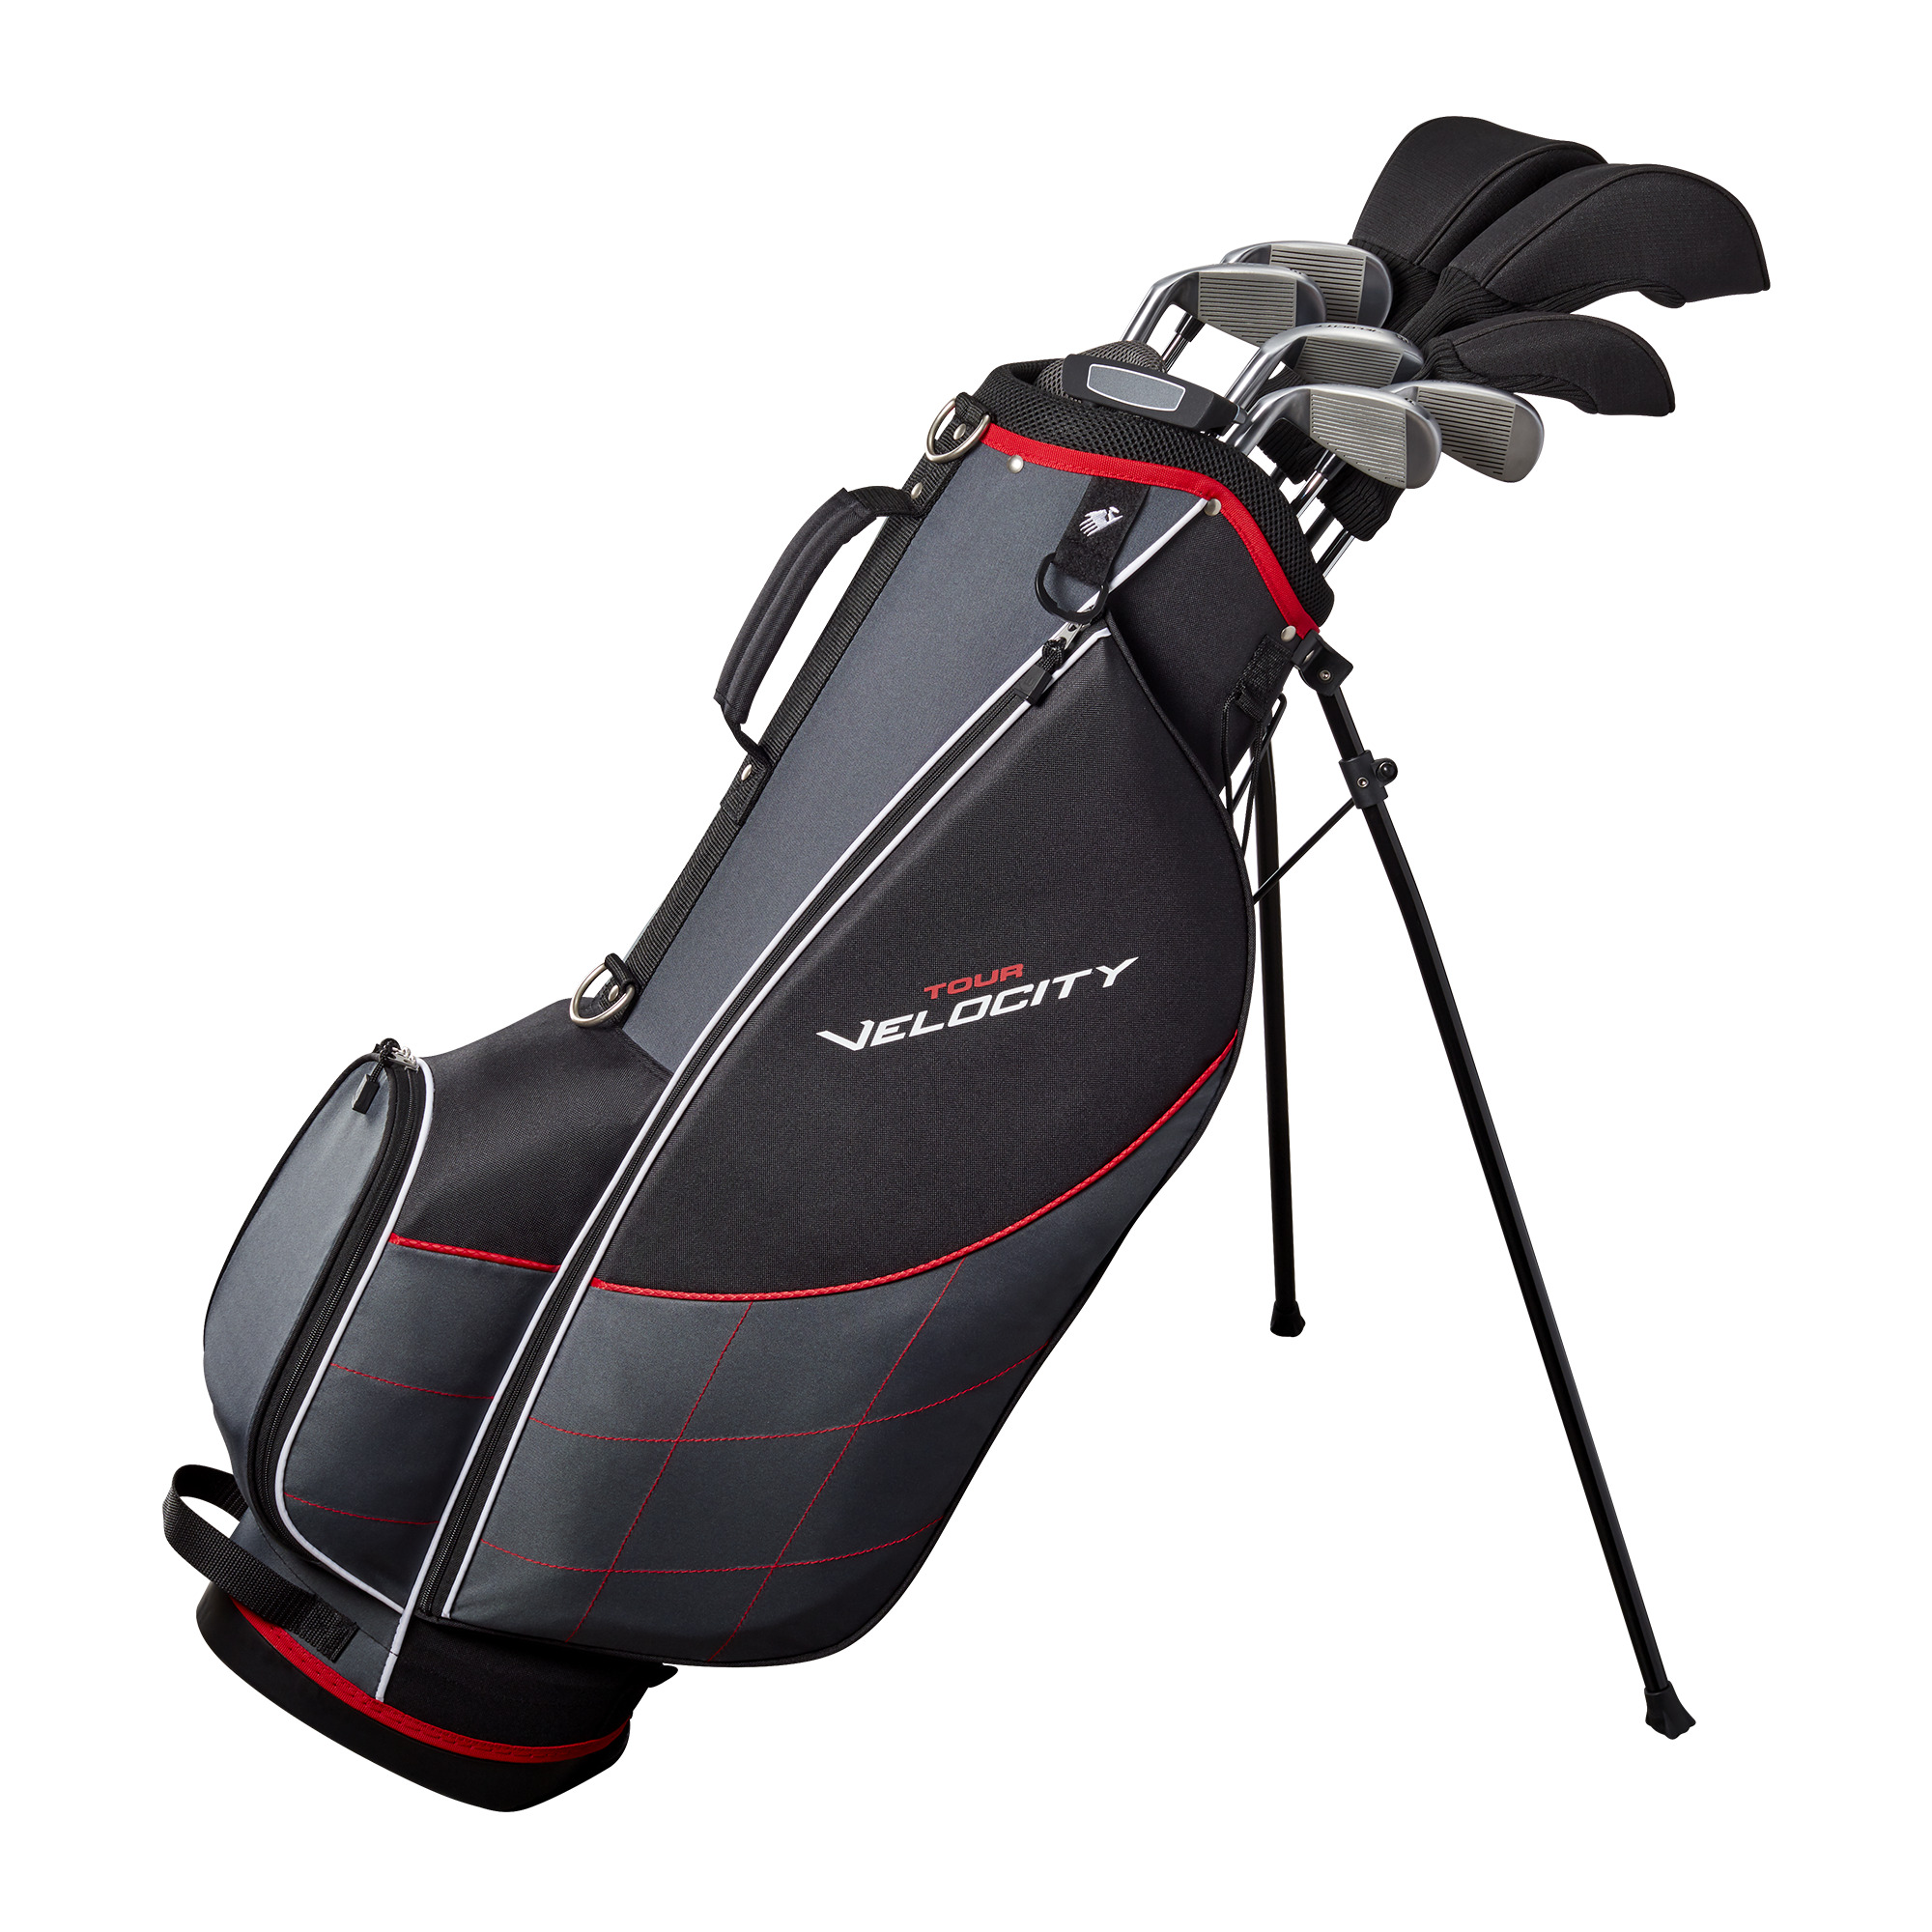 Wilson Tour Velocity Men's Golf Club Set, Right-Handed - image 2 of 7